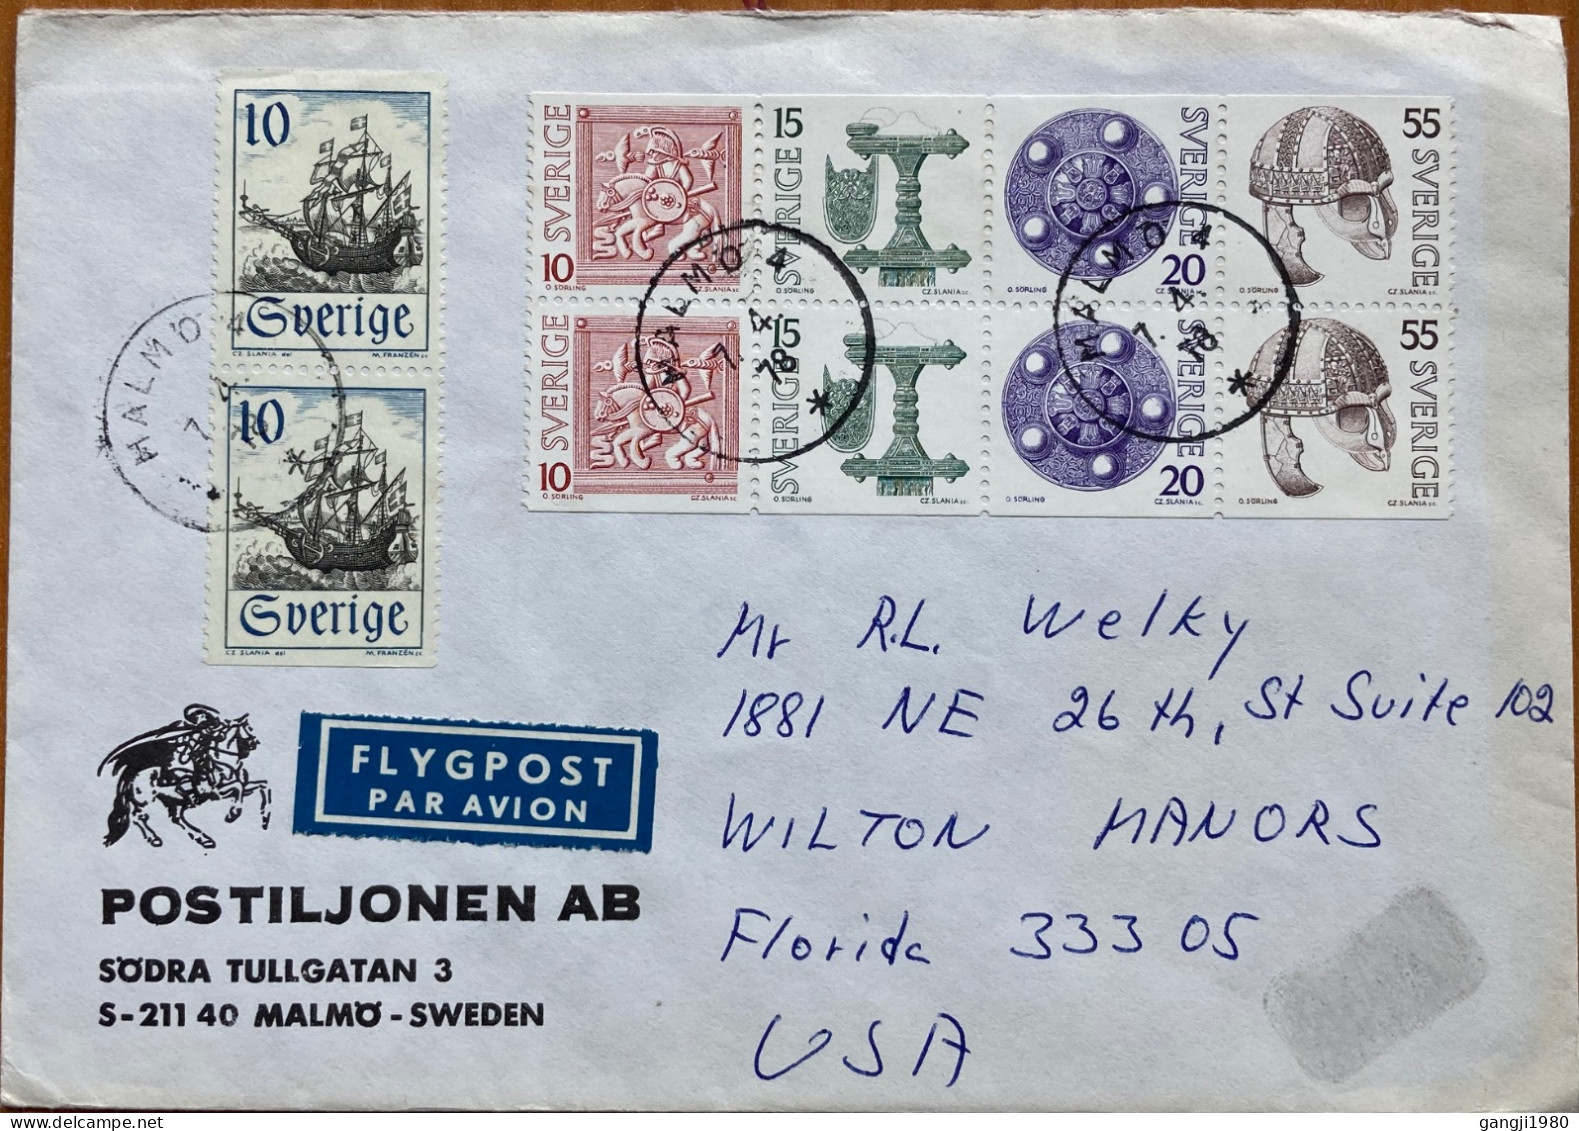 SWEDEN 1978, ILLUSTRATE COVER, USED TO USA, ARCHAEOLOGICAL DISCOVERY, BOOKLET PANE, MULTI 10 STAMP, HELMET, SHIELD, SHIP - Brieven En Documenten